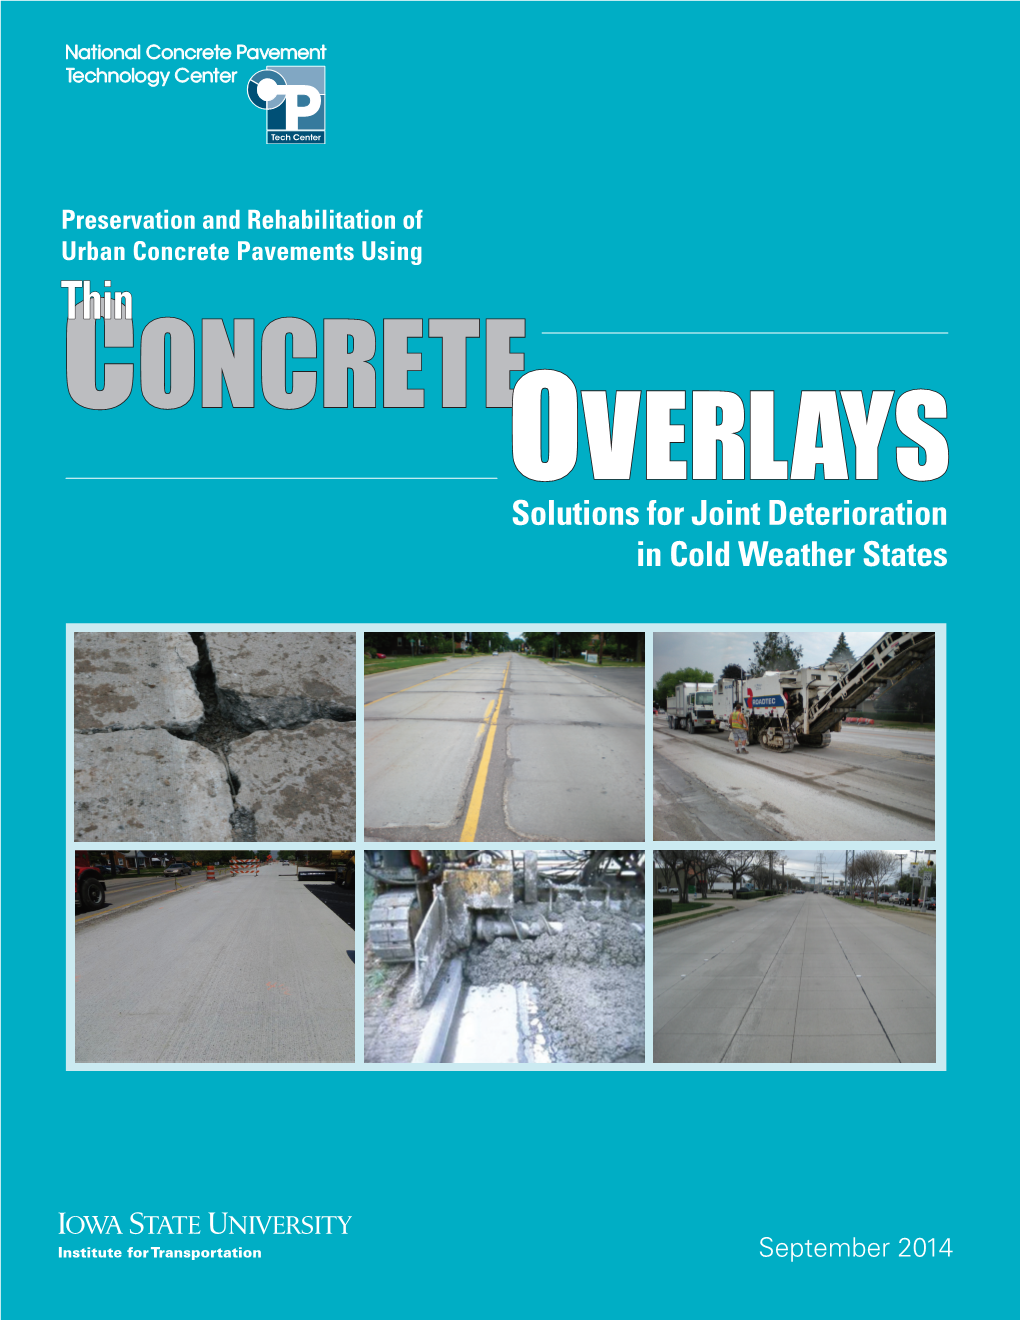 Preservation and Rehabilitation of Urban Concrete Pavements Using Thin CONCRETE OVERLAYS Solutions for Joint Deterioration in Cold Weather States